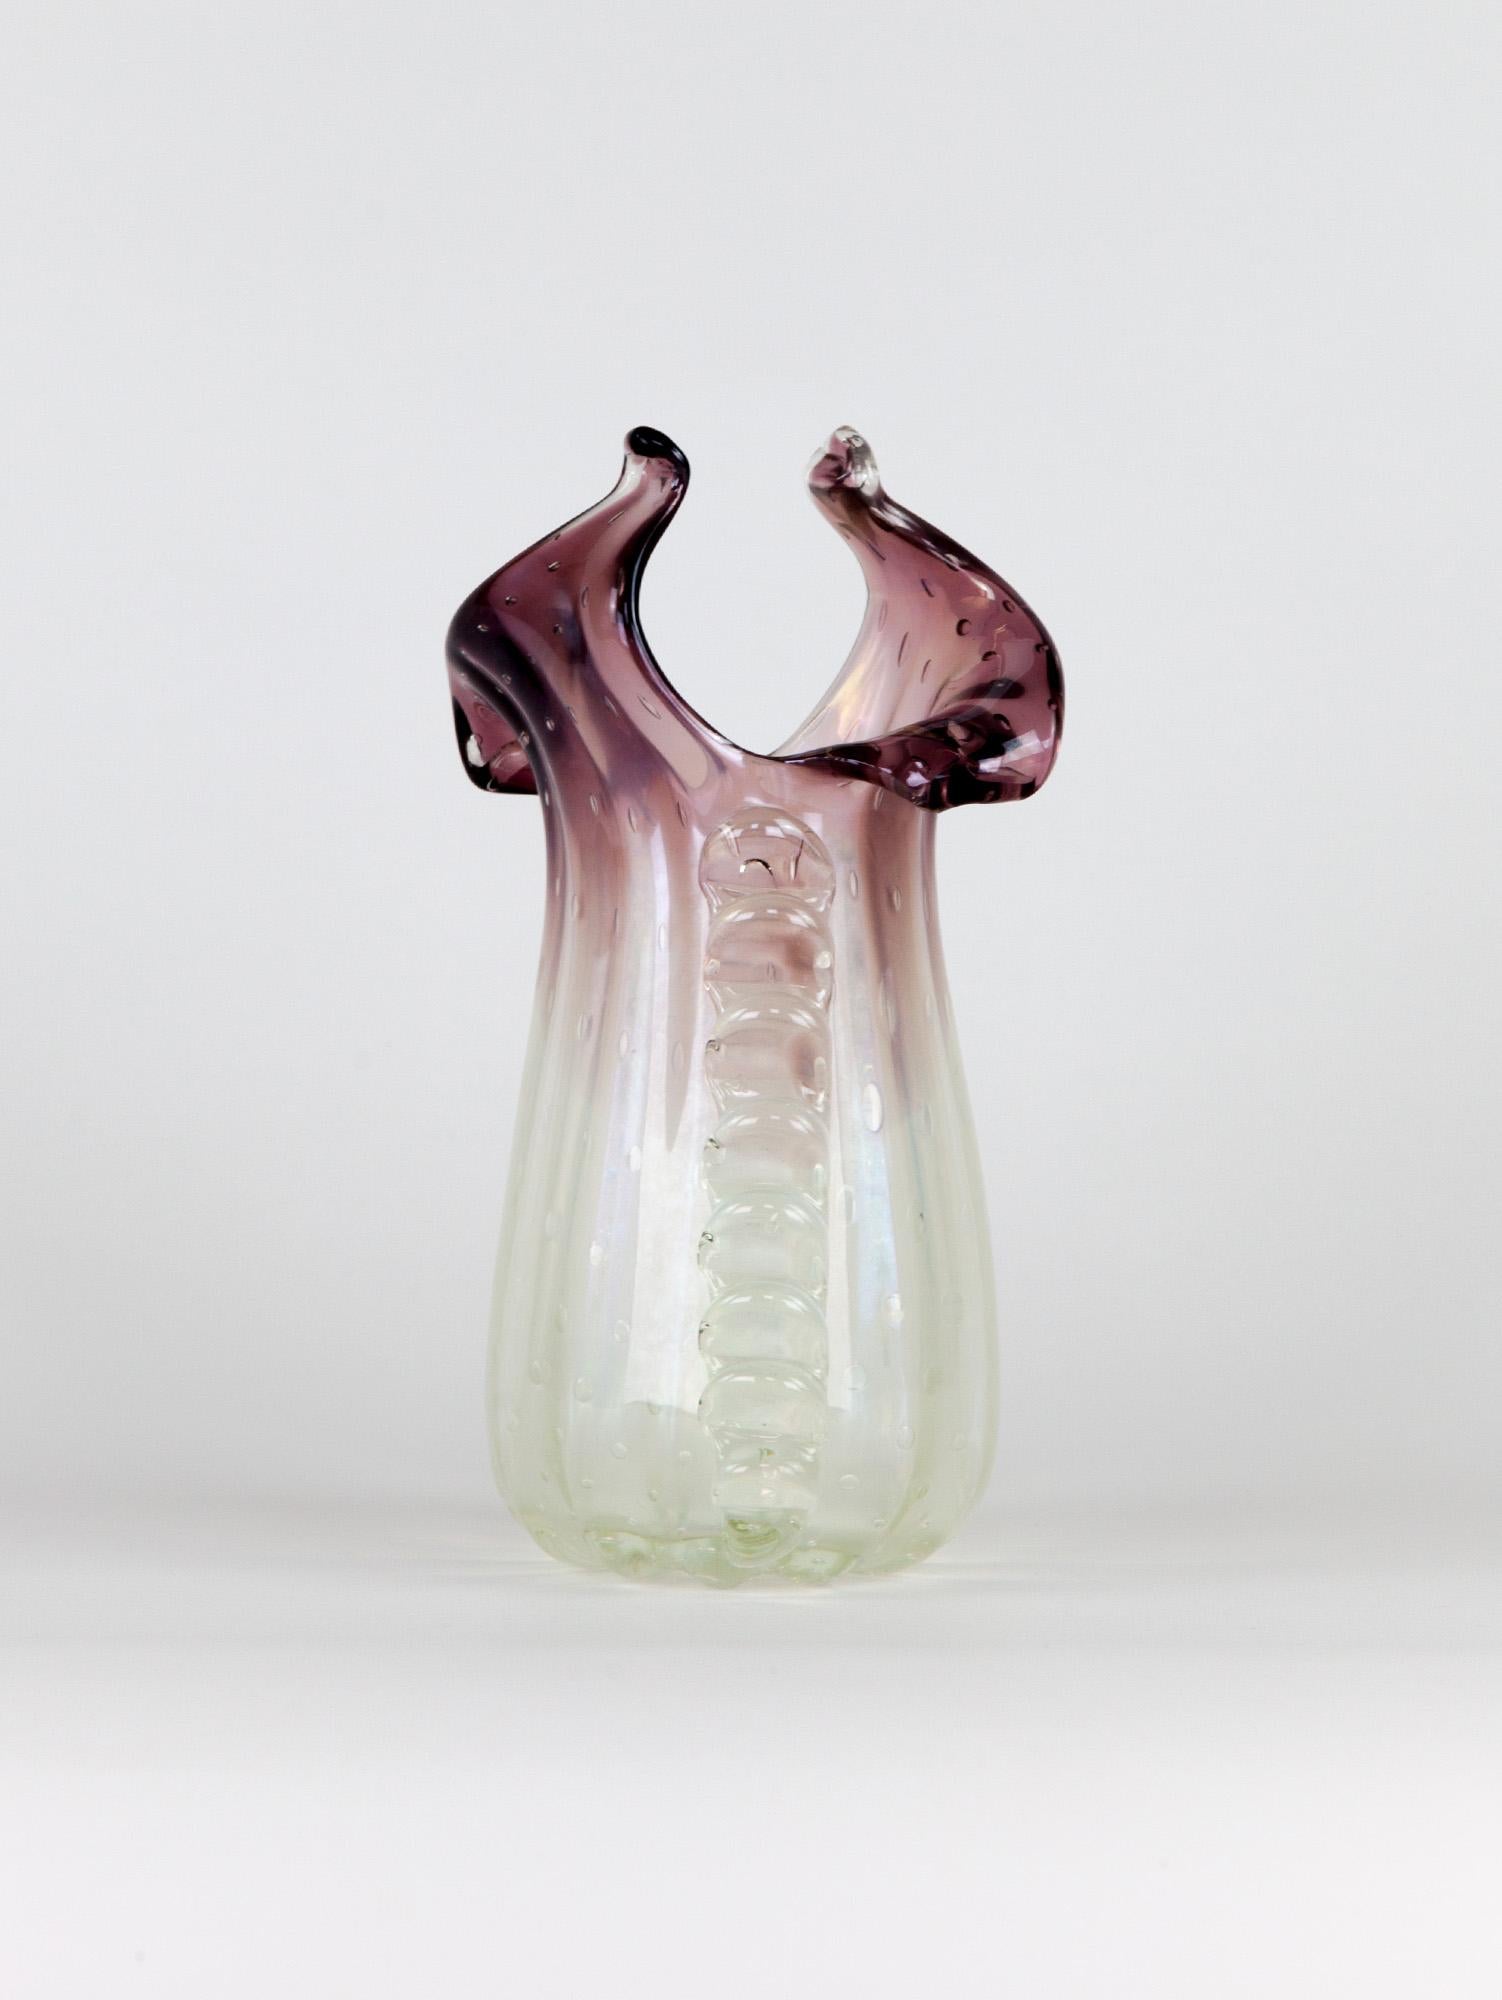 Vintage Italian Murano Pearlescent Glass Vase, 1940s For Sale 2